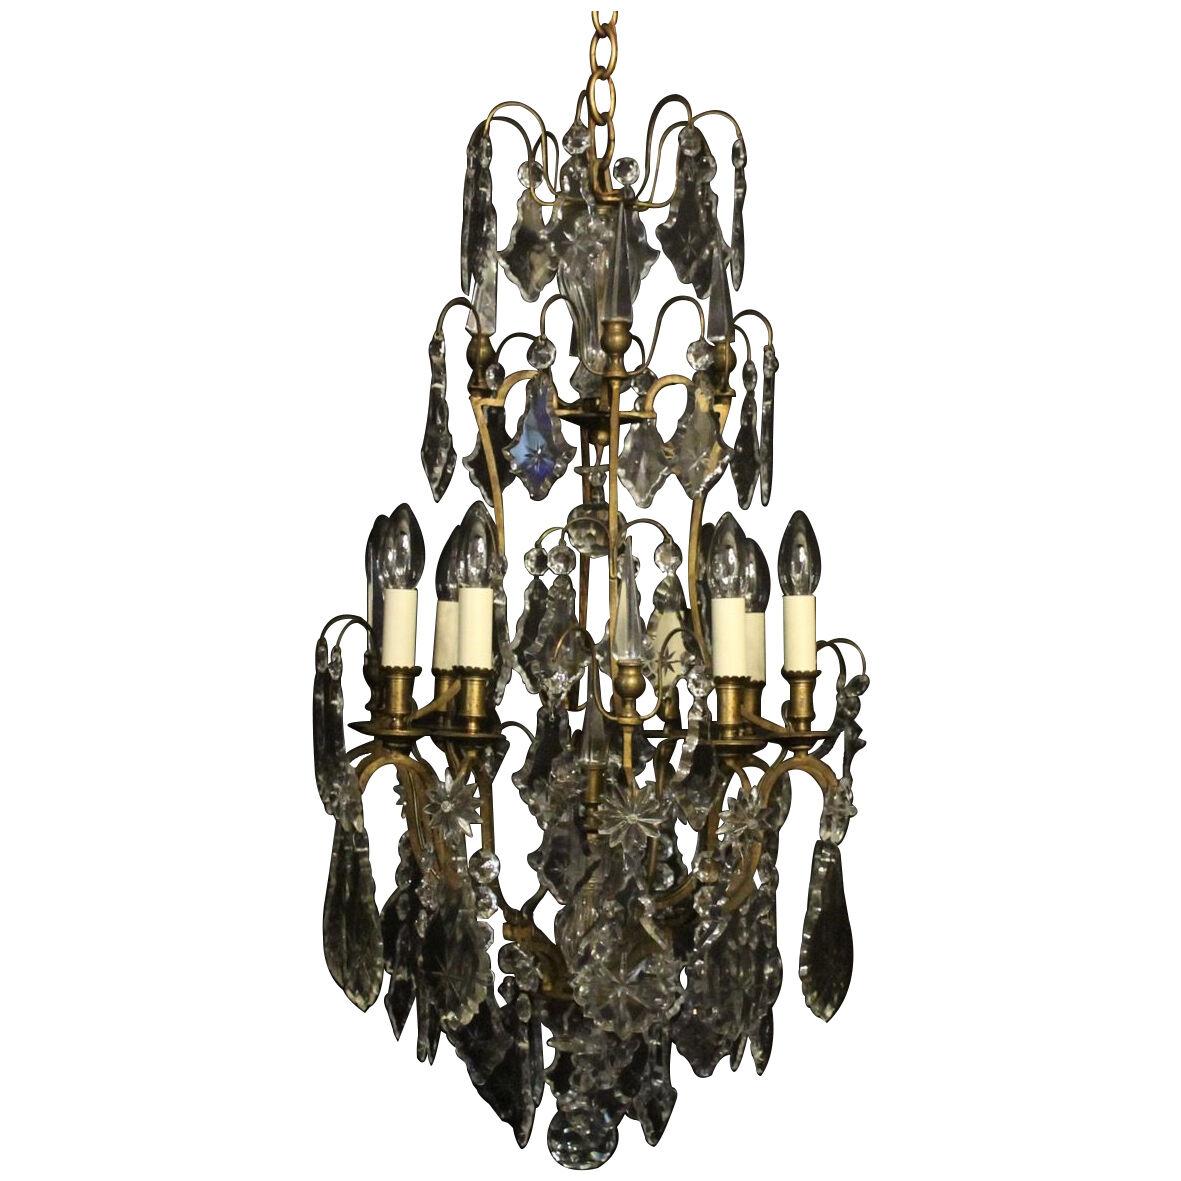 French 19th Century Gilded 8 Light Antique Chandelier